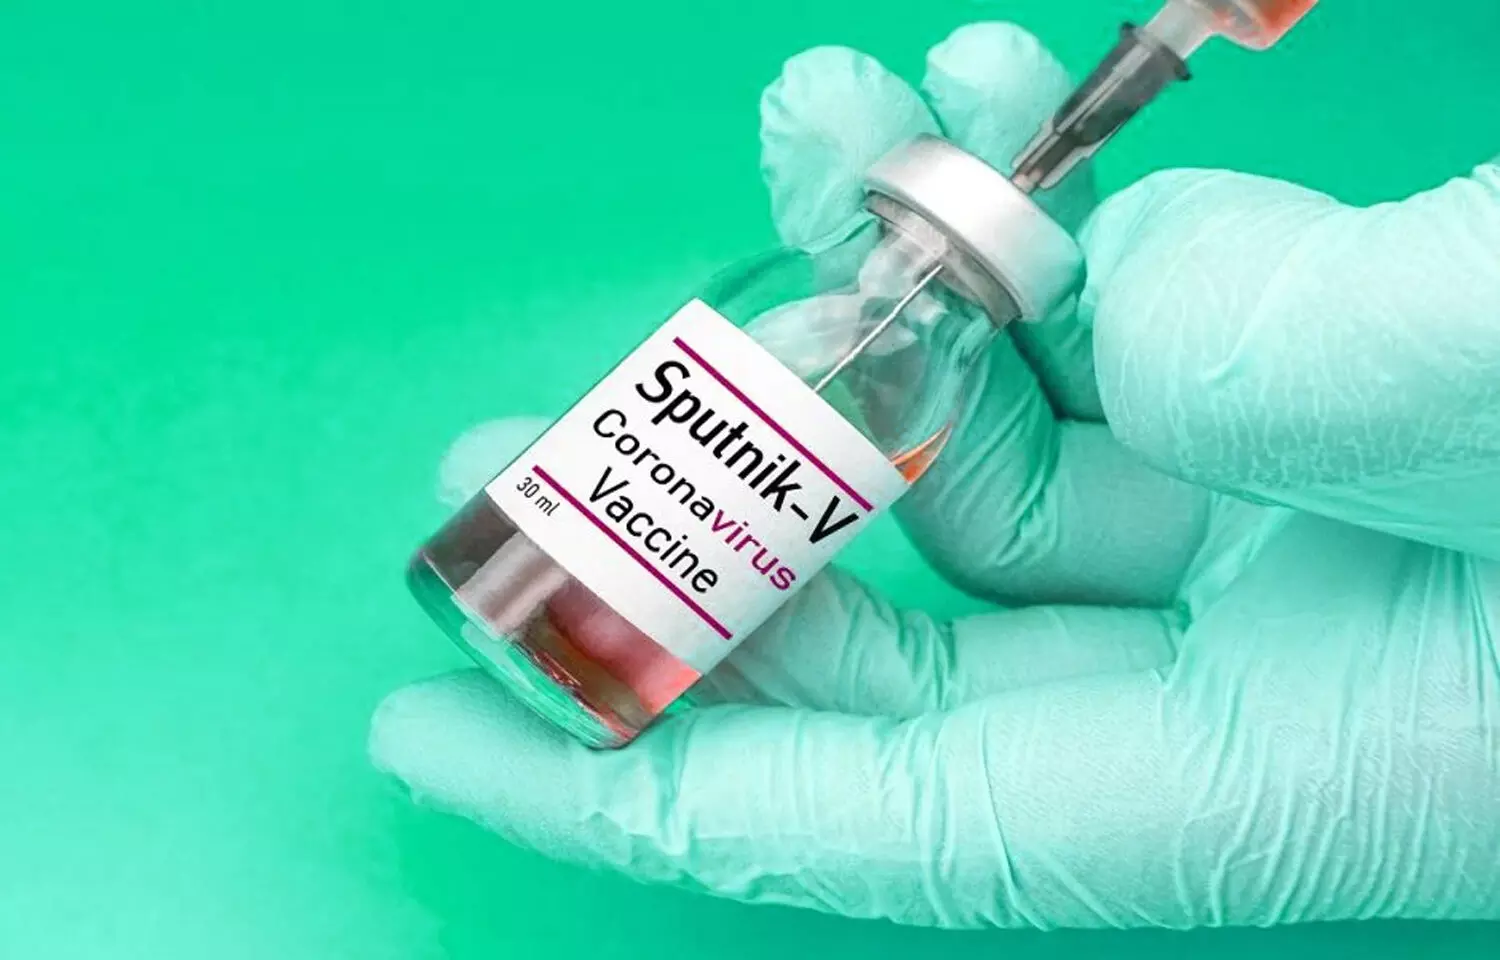 COVID-19: WHO continues to assess Sputnik V vaccine